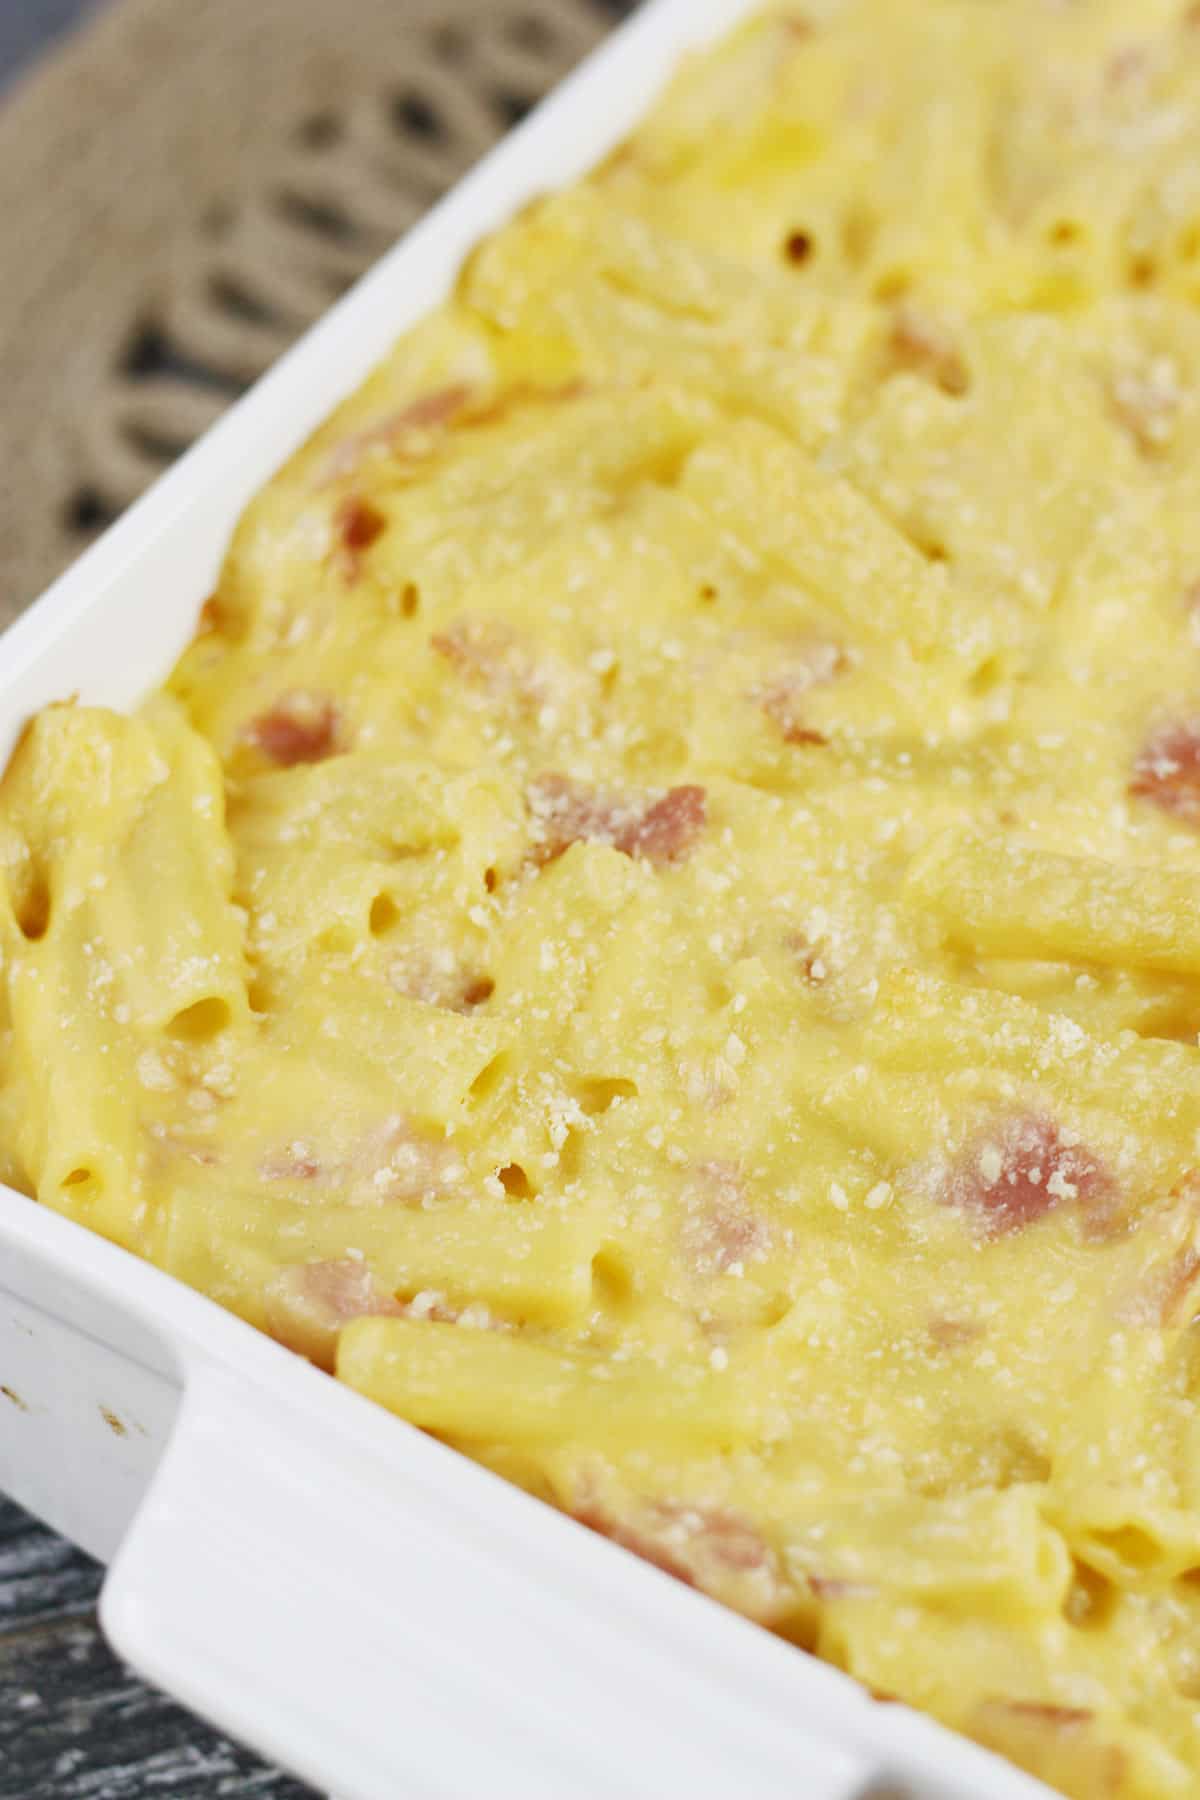 Ham and cheese casserole being served in a white dish.